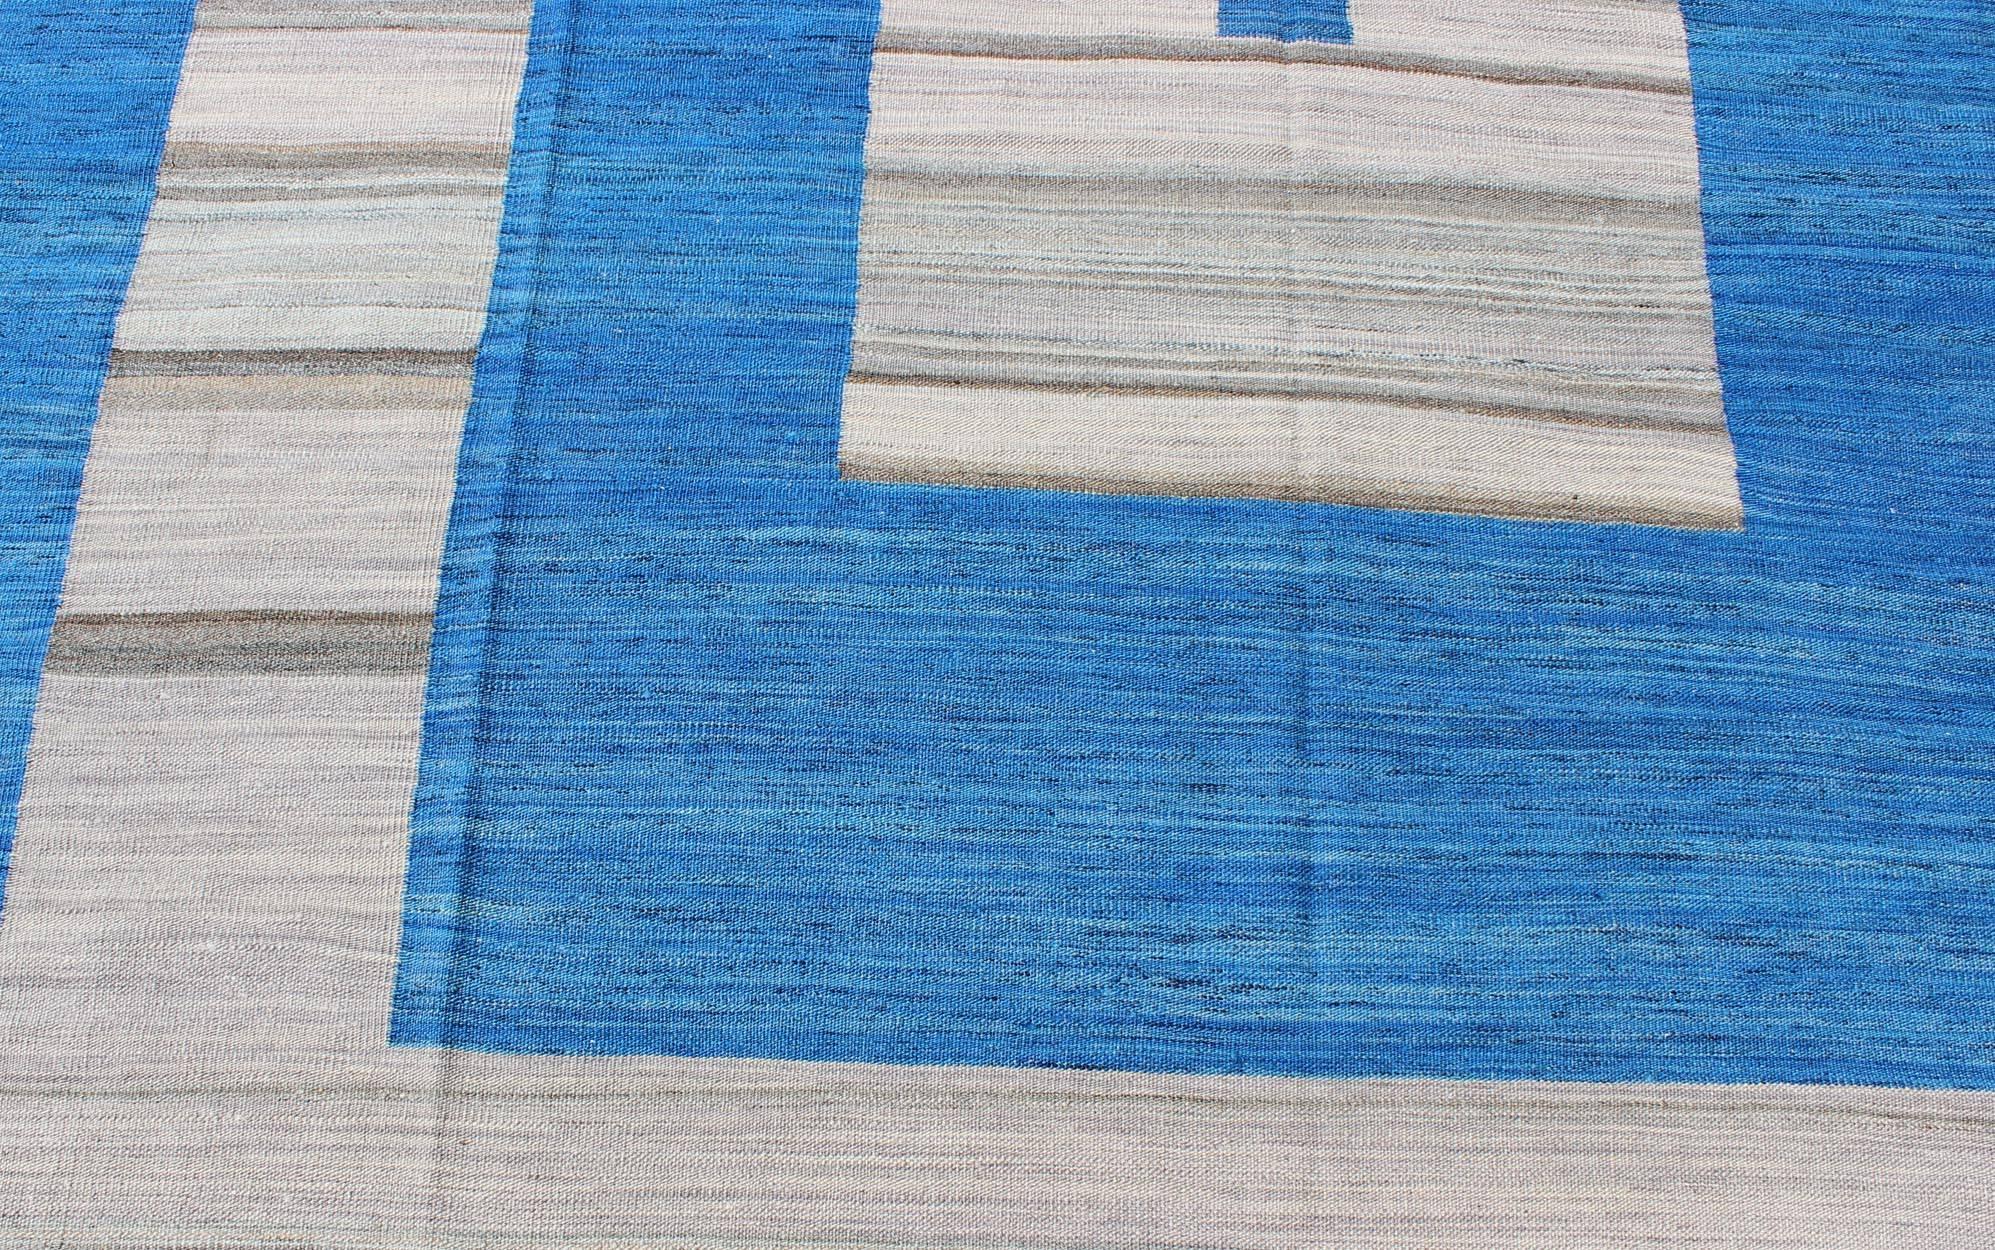 Fine Weave Kilim Rug with Large Modern Pattern in Cobalt Blue and Gray For Sale 2